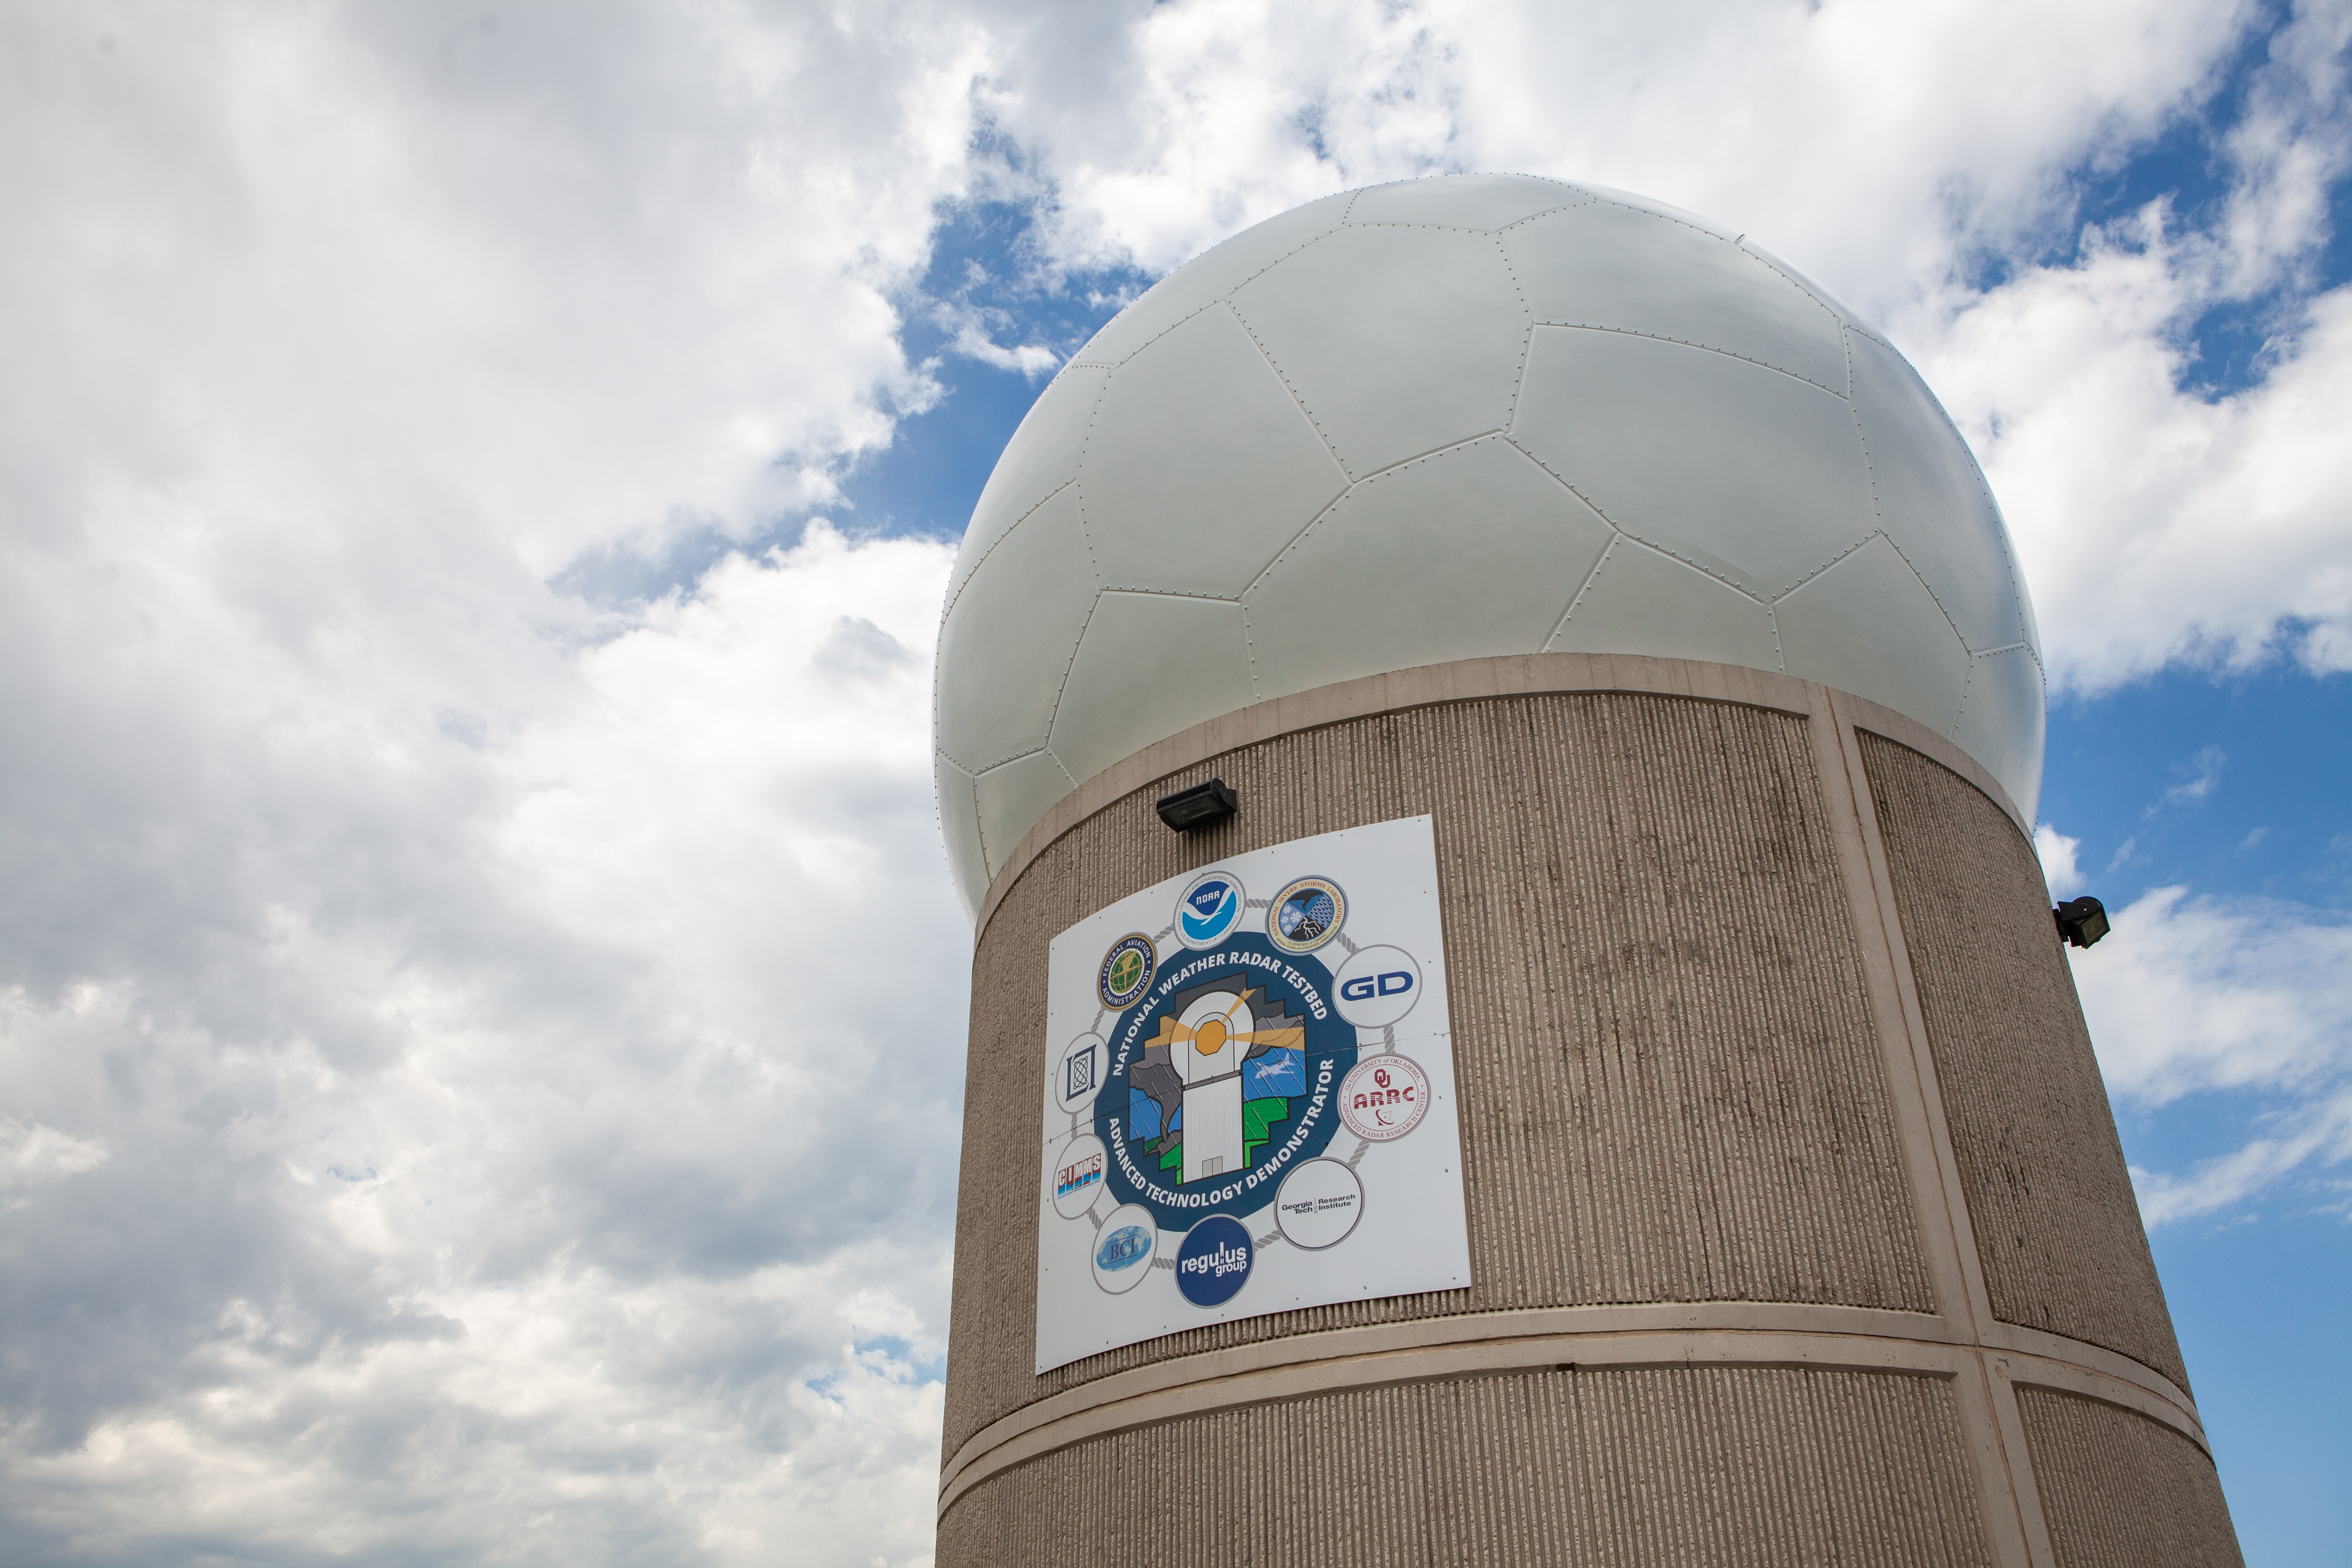 Installed at the National Weather Radar Testbed facility, the Advanced Technology Demonstrator, or ATD, is the first full-scale, S-band, dual-polarization phased array radar built from the ground up and designed specifically for use as a weather radar.  Photo credit: James Murnan/NOAA